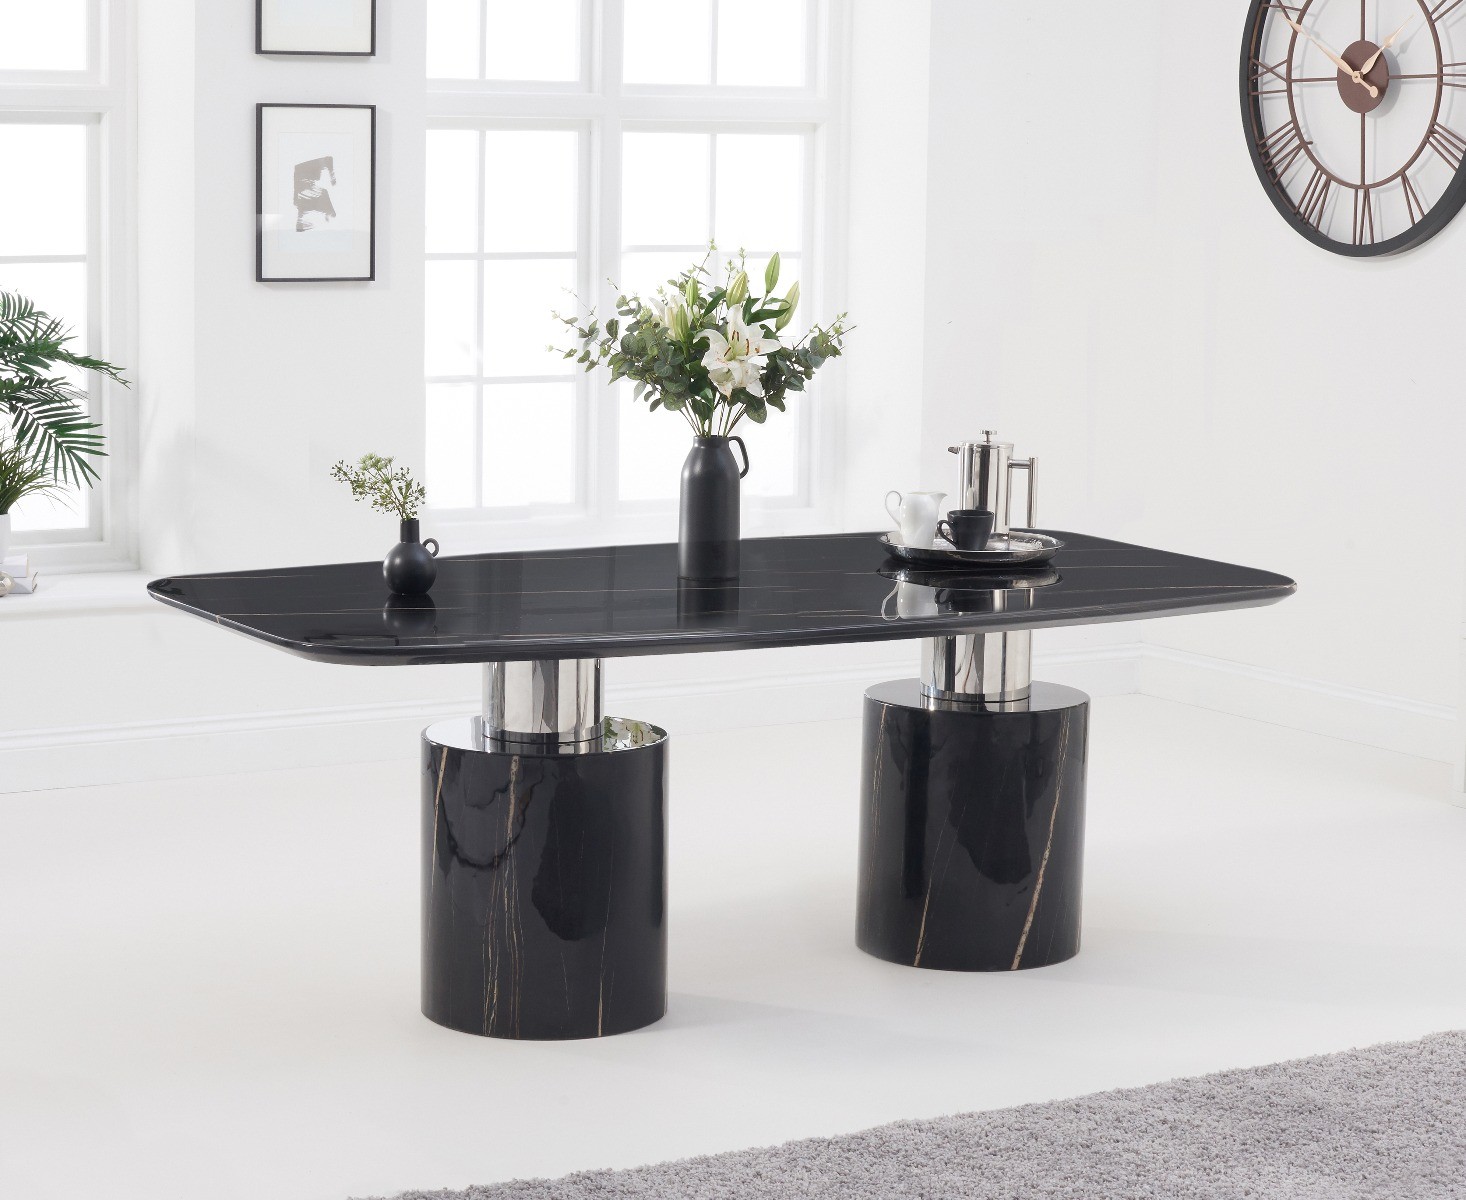 Photo 1 of Antonio 180cm black marble dining table with 4 white aldo chairs